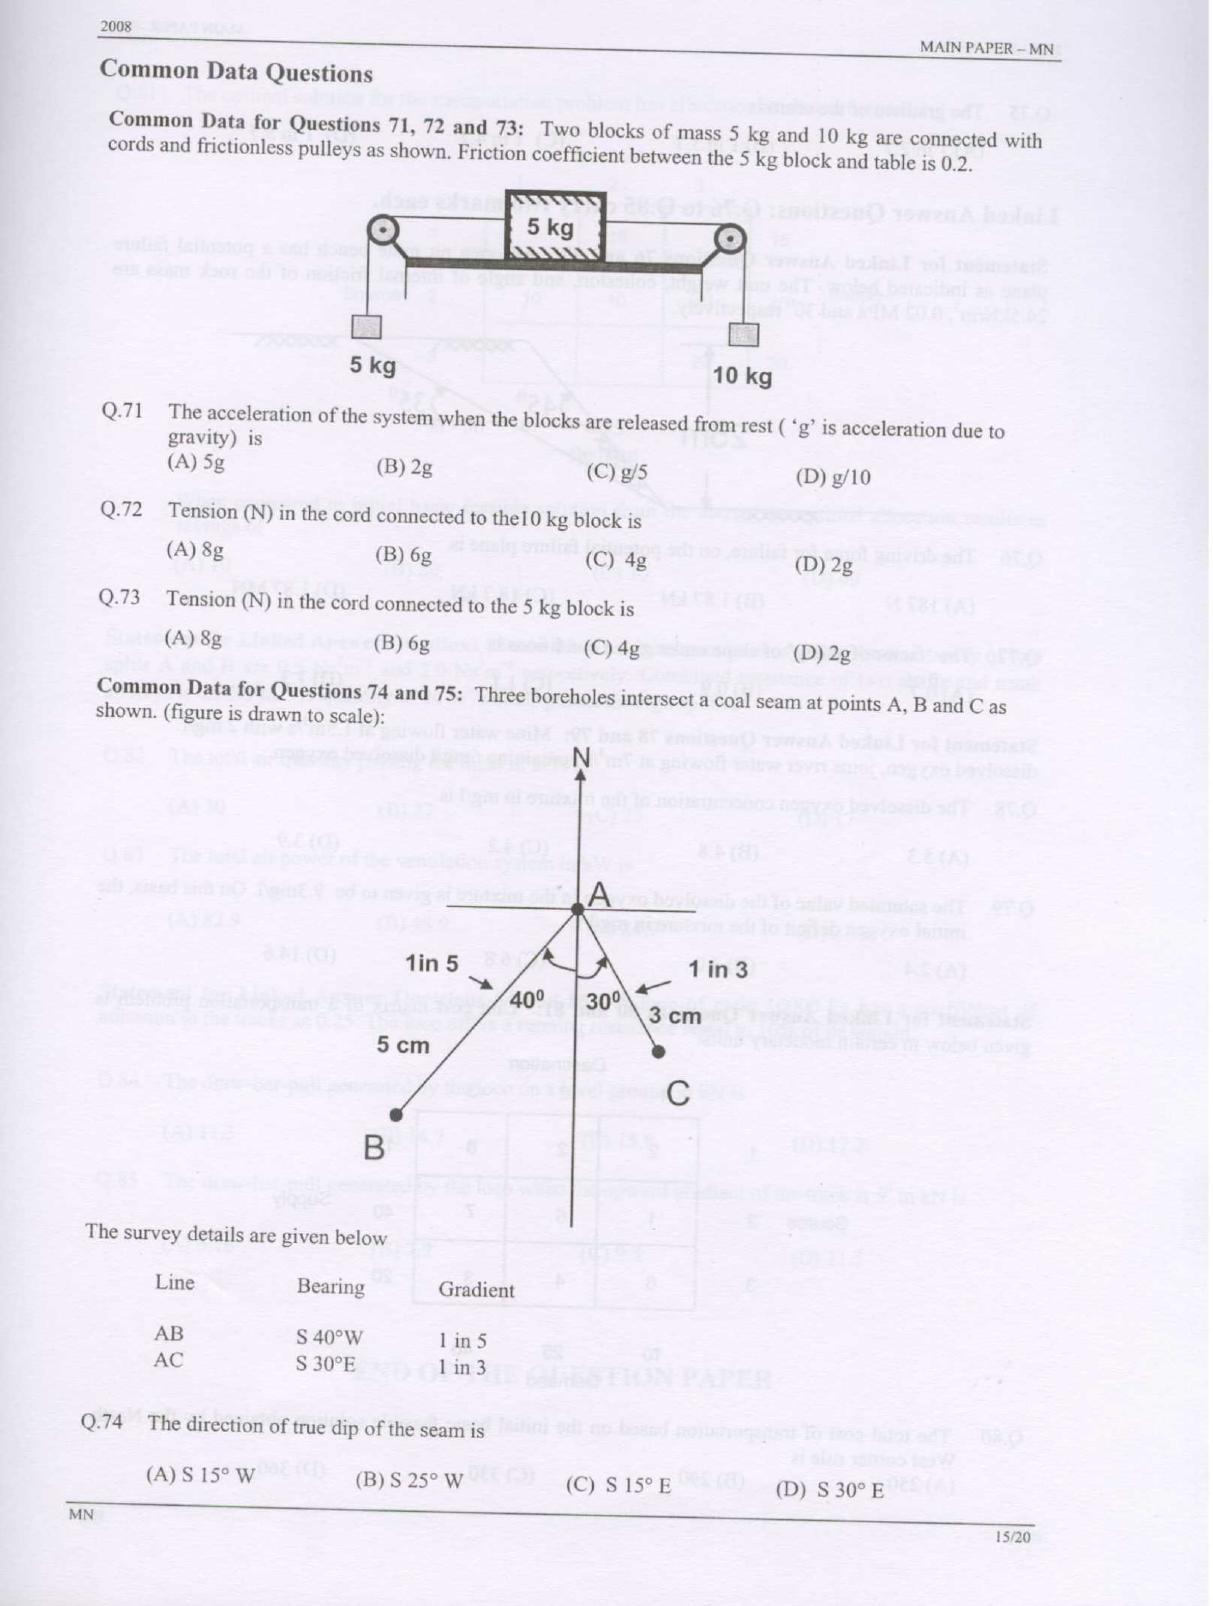 GATE 2008 Mining Engineering (MN) Question Paper with Answer Key - Page 15